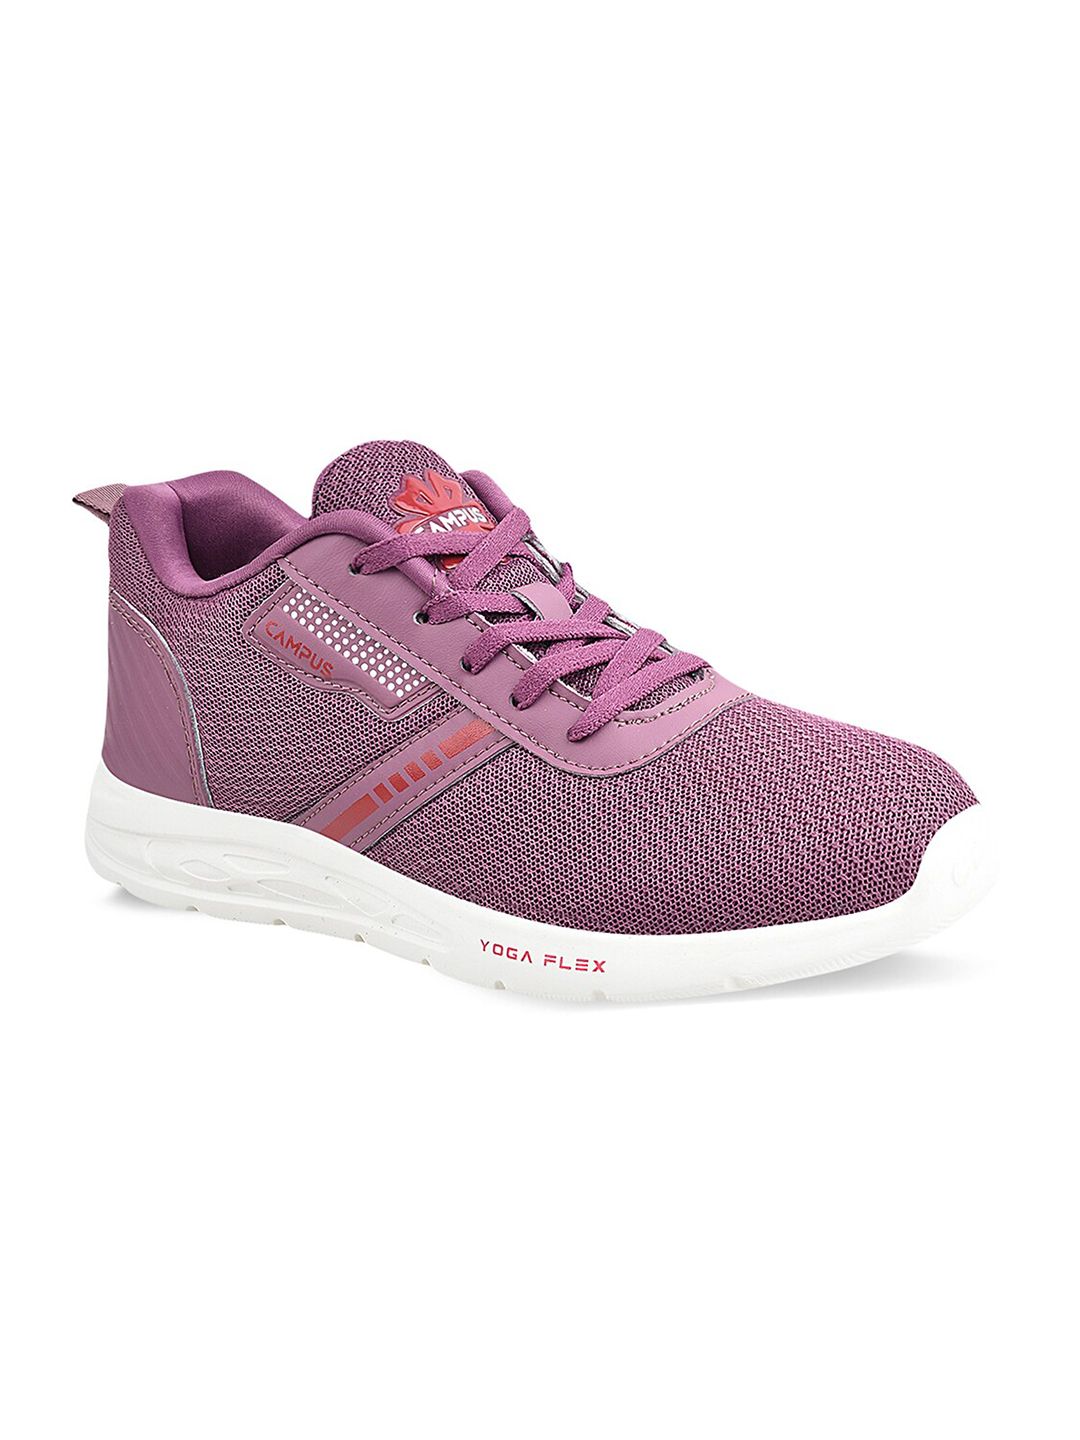 Campus Women Mauve Mesh Dolphin Regular Running Shoes Price in India